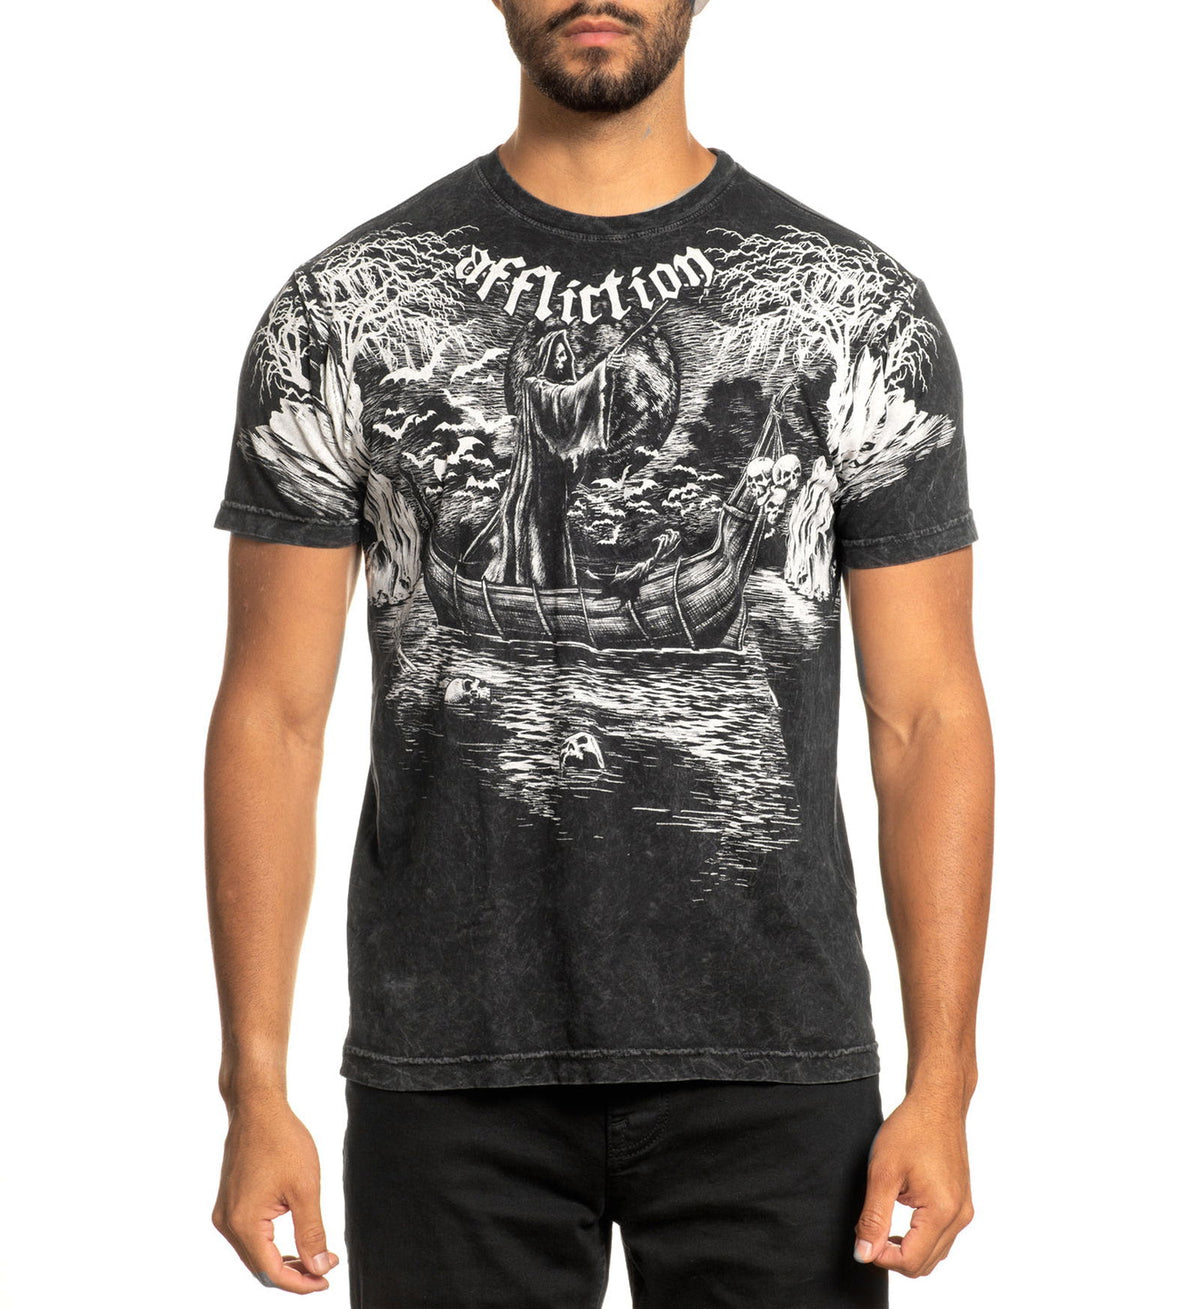 River Styx - Affliction Clothing